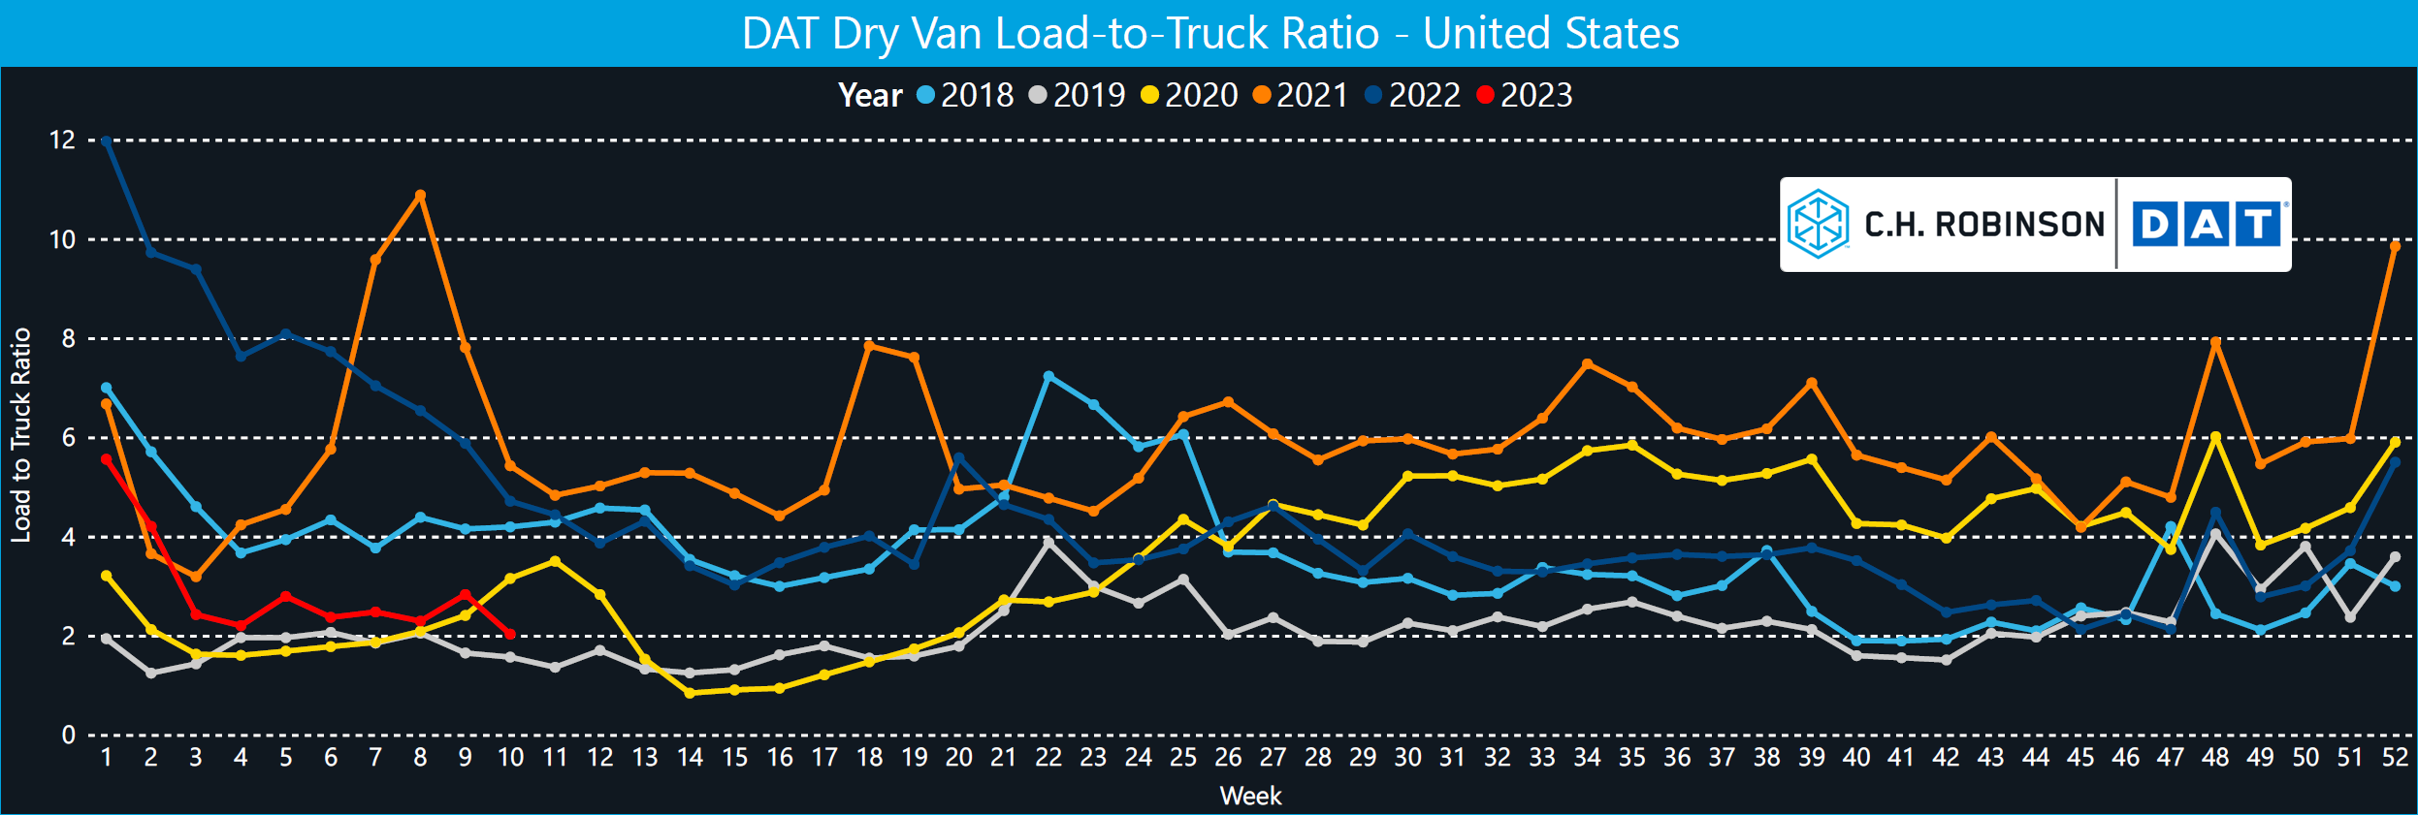 dry van to truck 5 year comparison 